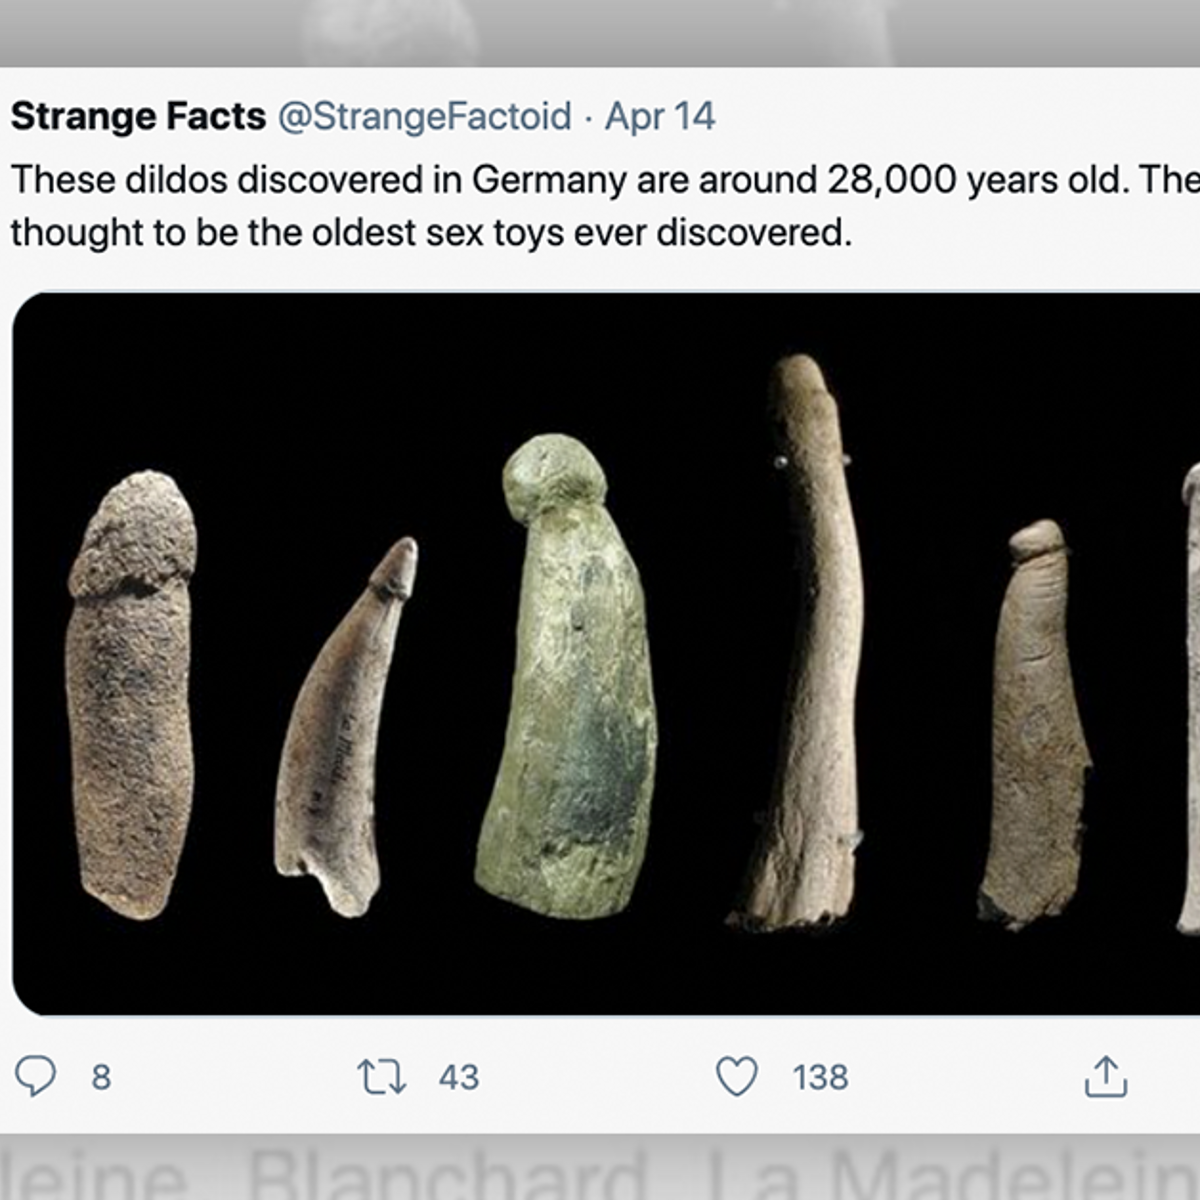 Are These Dildos Really 28,000 Years Old? Snopes